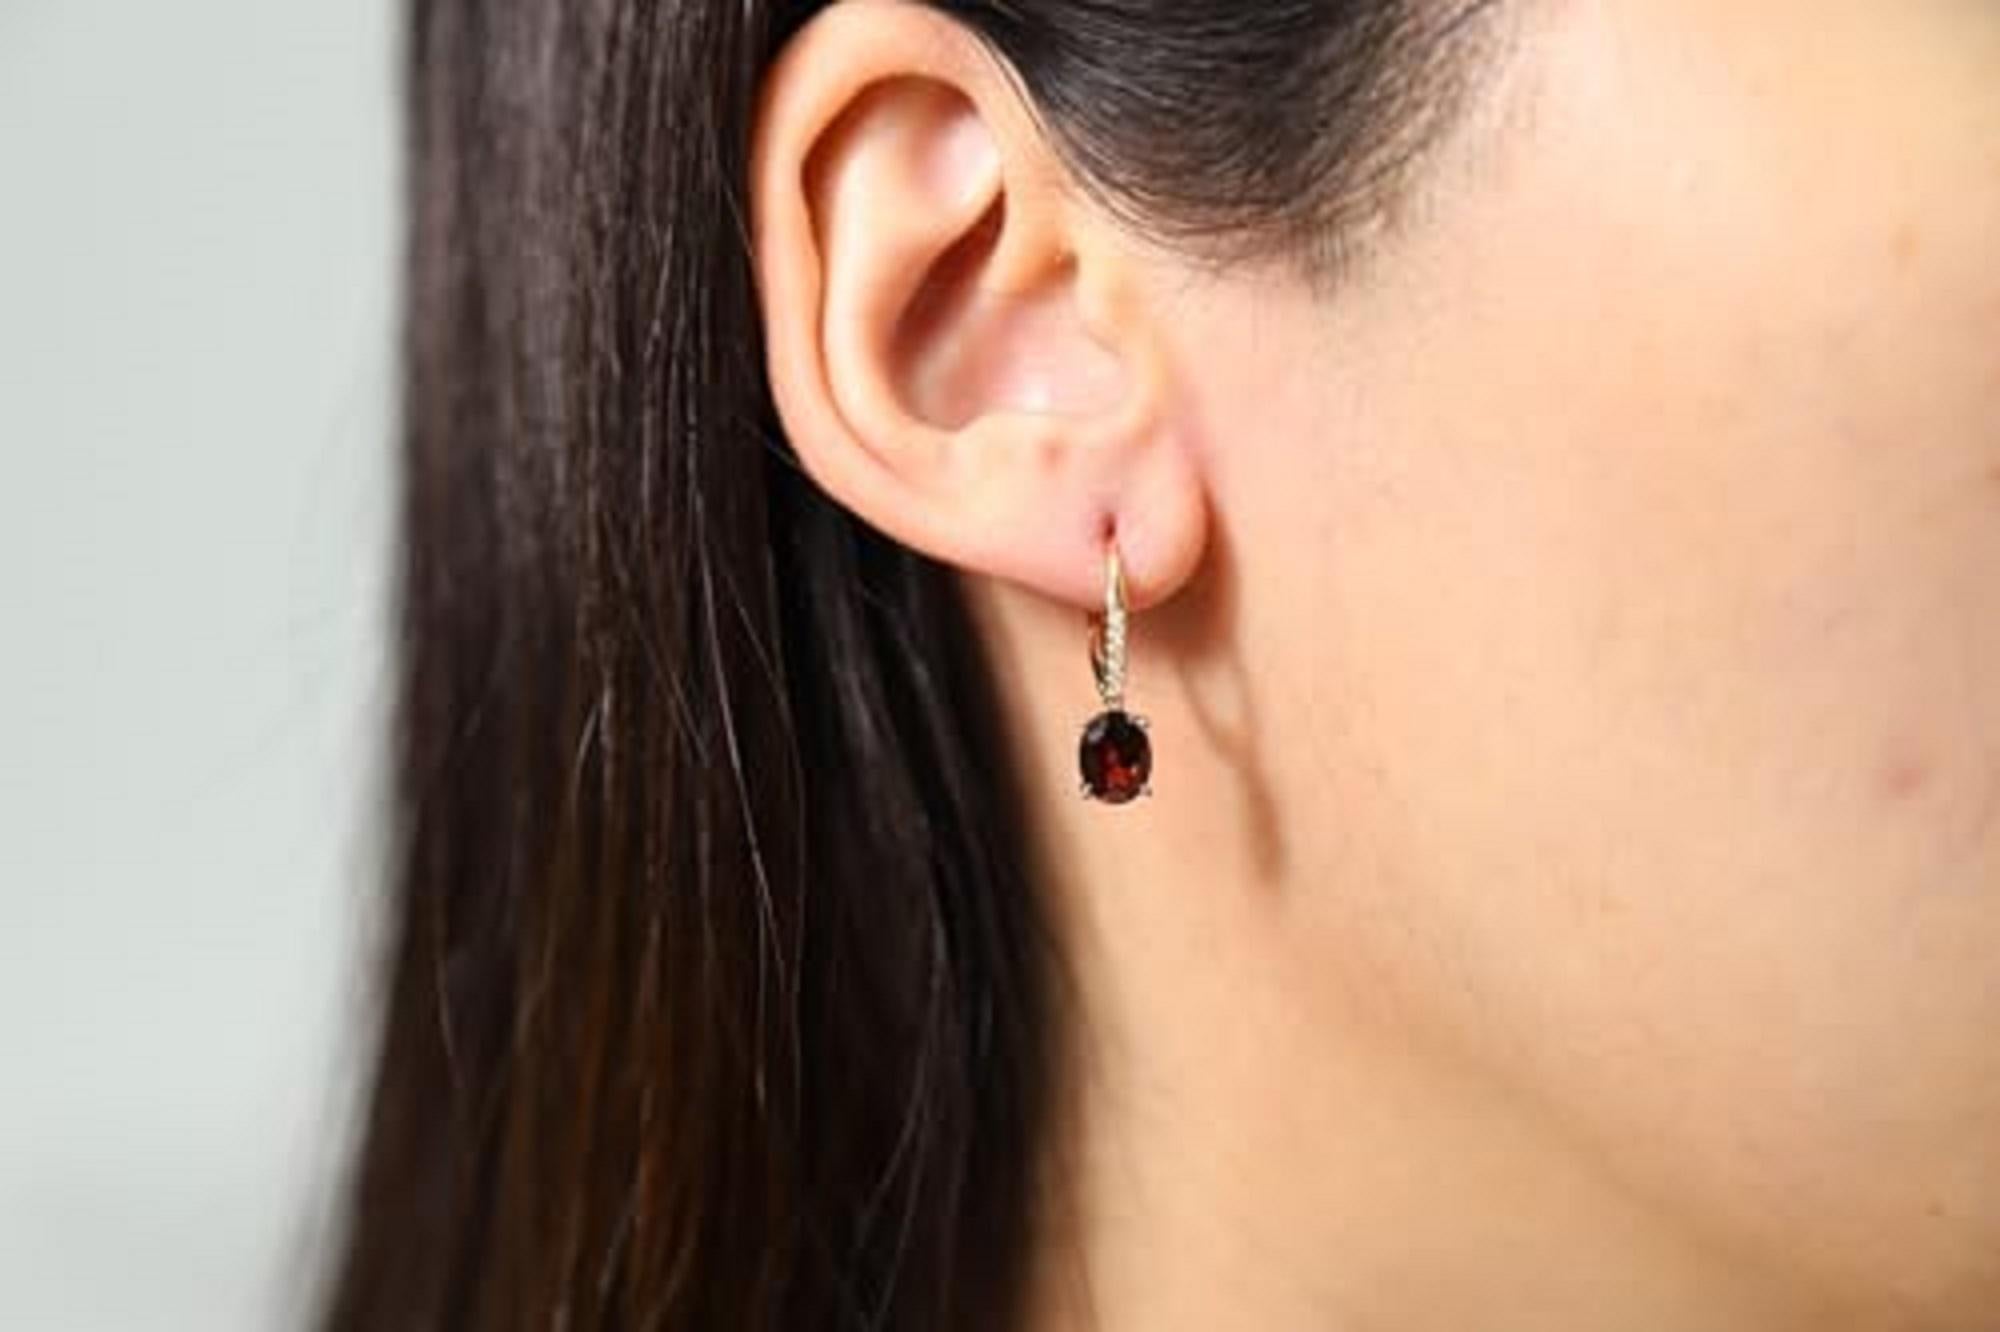 Decorate yourself in elegance with this Earring is crafted from 14K Yellow Gold by Gin & Grace Earring. The jewelry boasts 6X8 Oval-Cut prong setting Garnet (2 pcs) 3.00 Carat and Round-Cut prong setting Diamond (12 pcs) 0.06 Carat. This Earring is